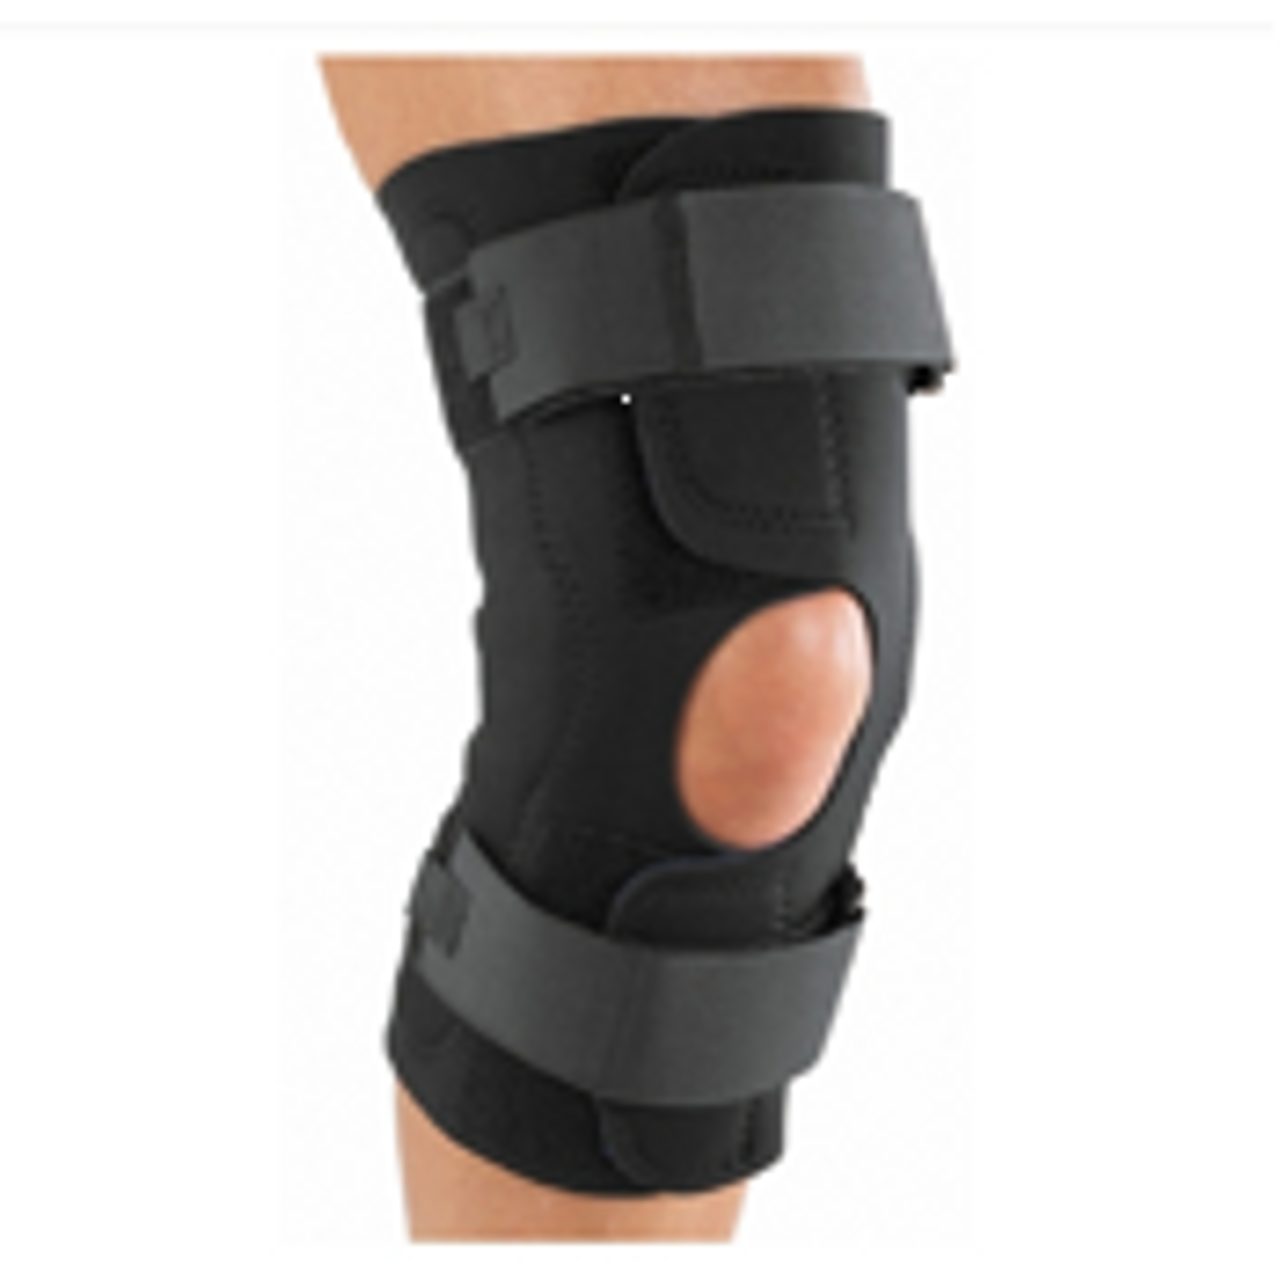 Deluxe Airprene Knee Brace SUGGESTED HCPC: L1825 - Advanced